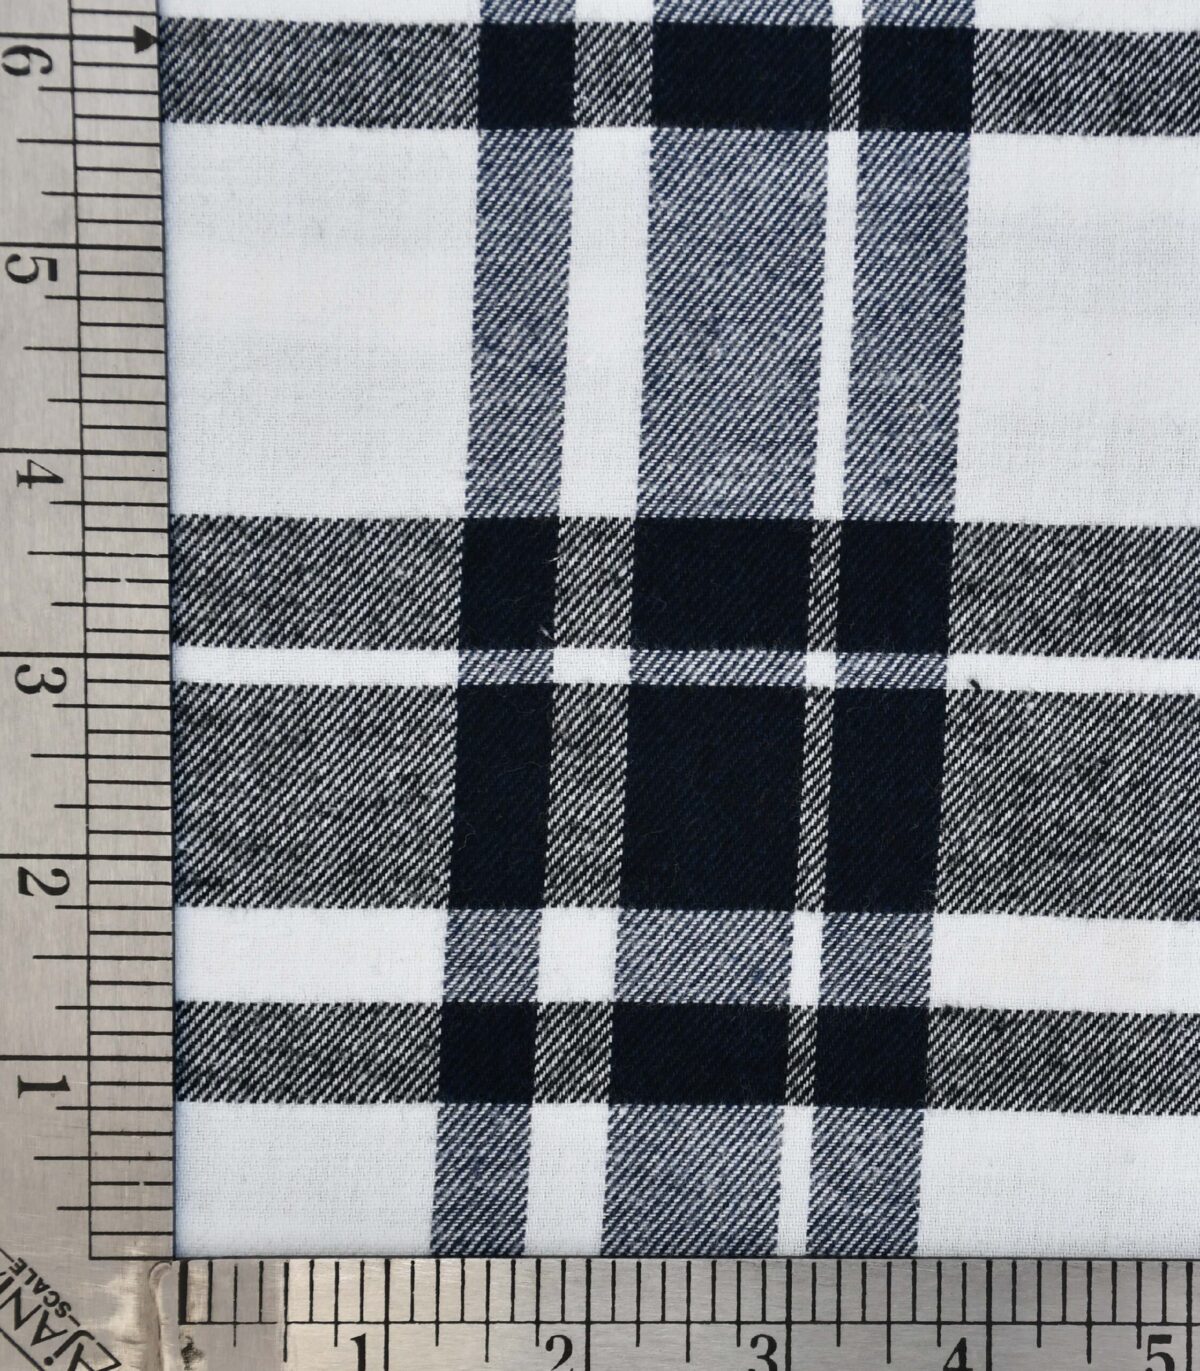 Yarn Dyed White & Black Color Checked Fabric